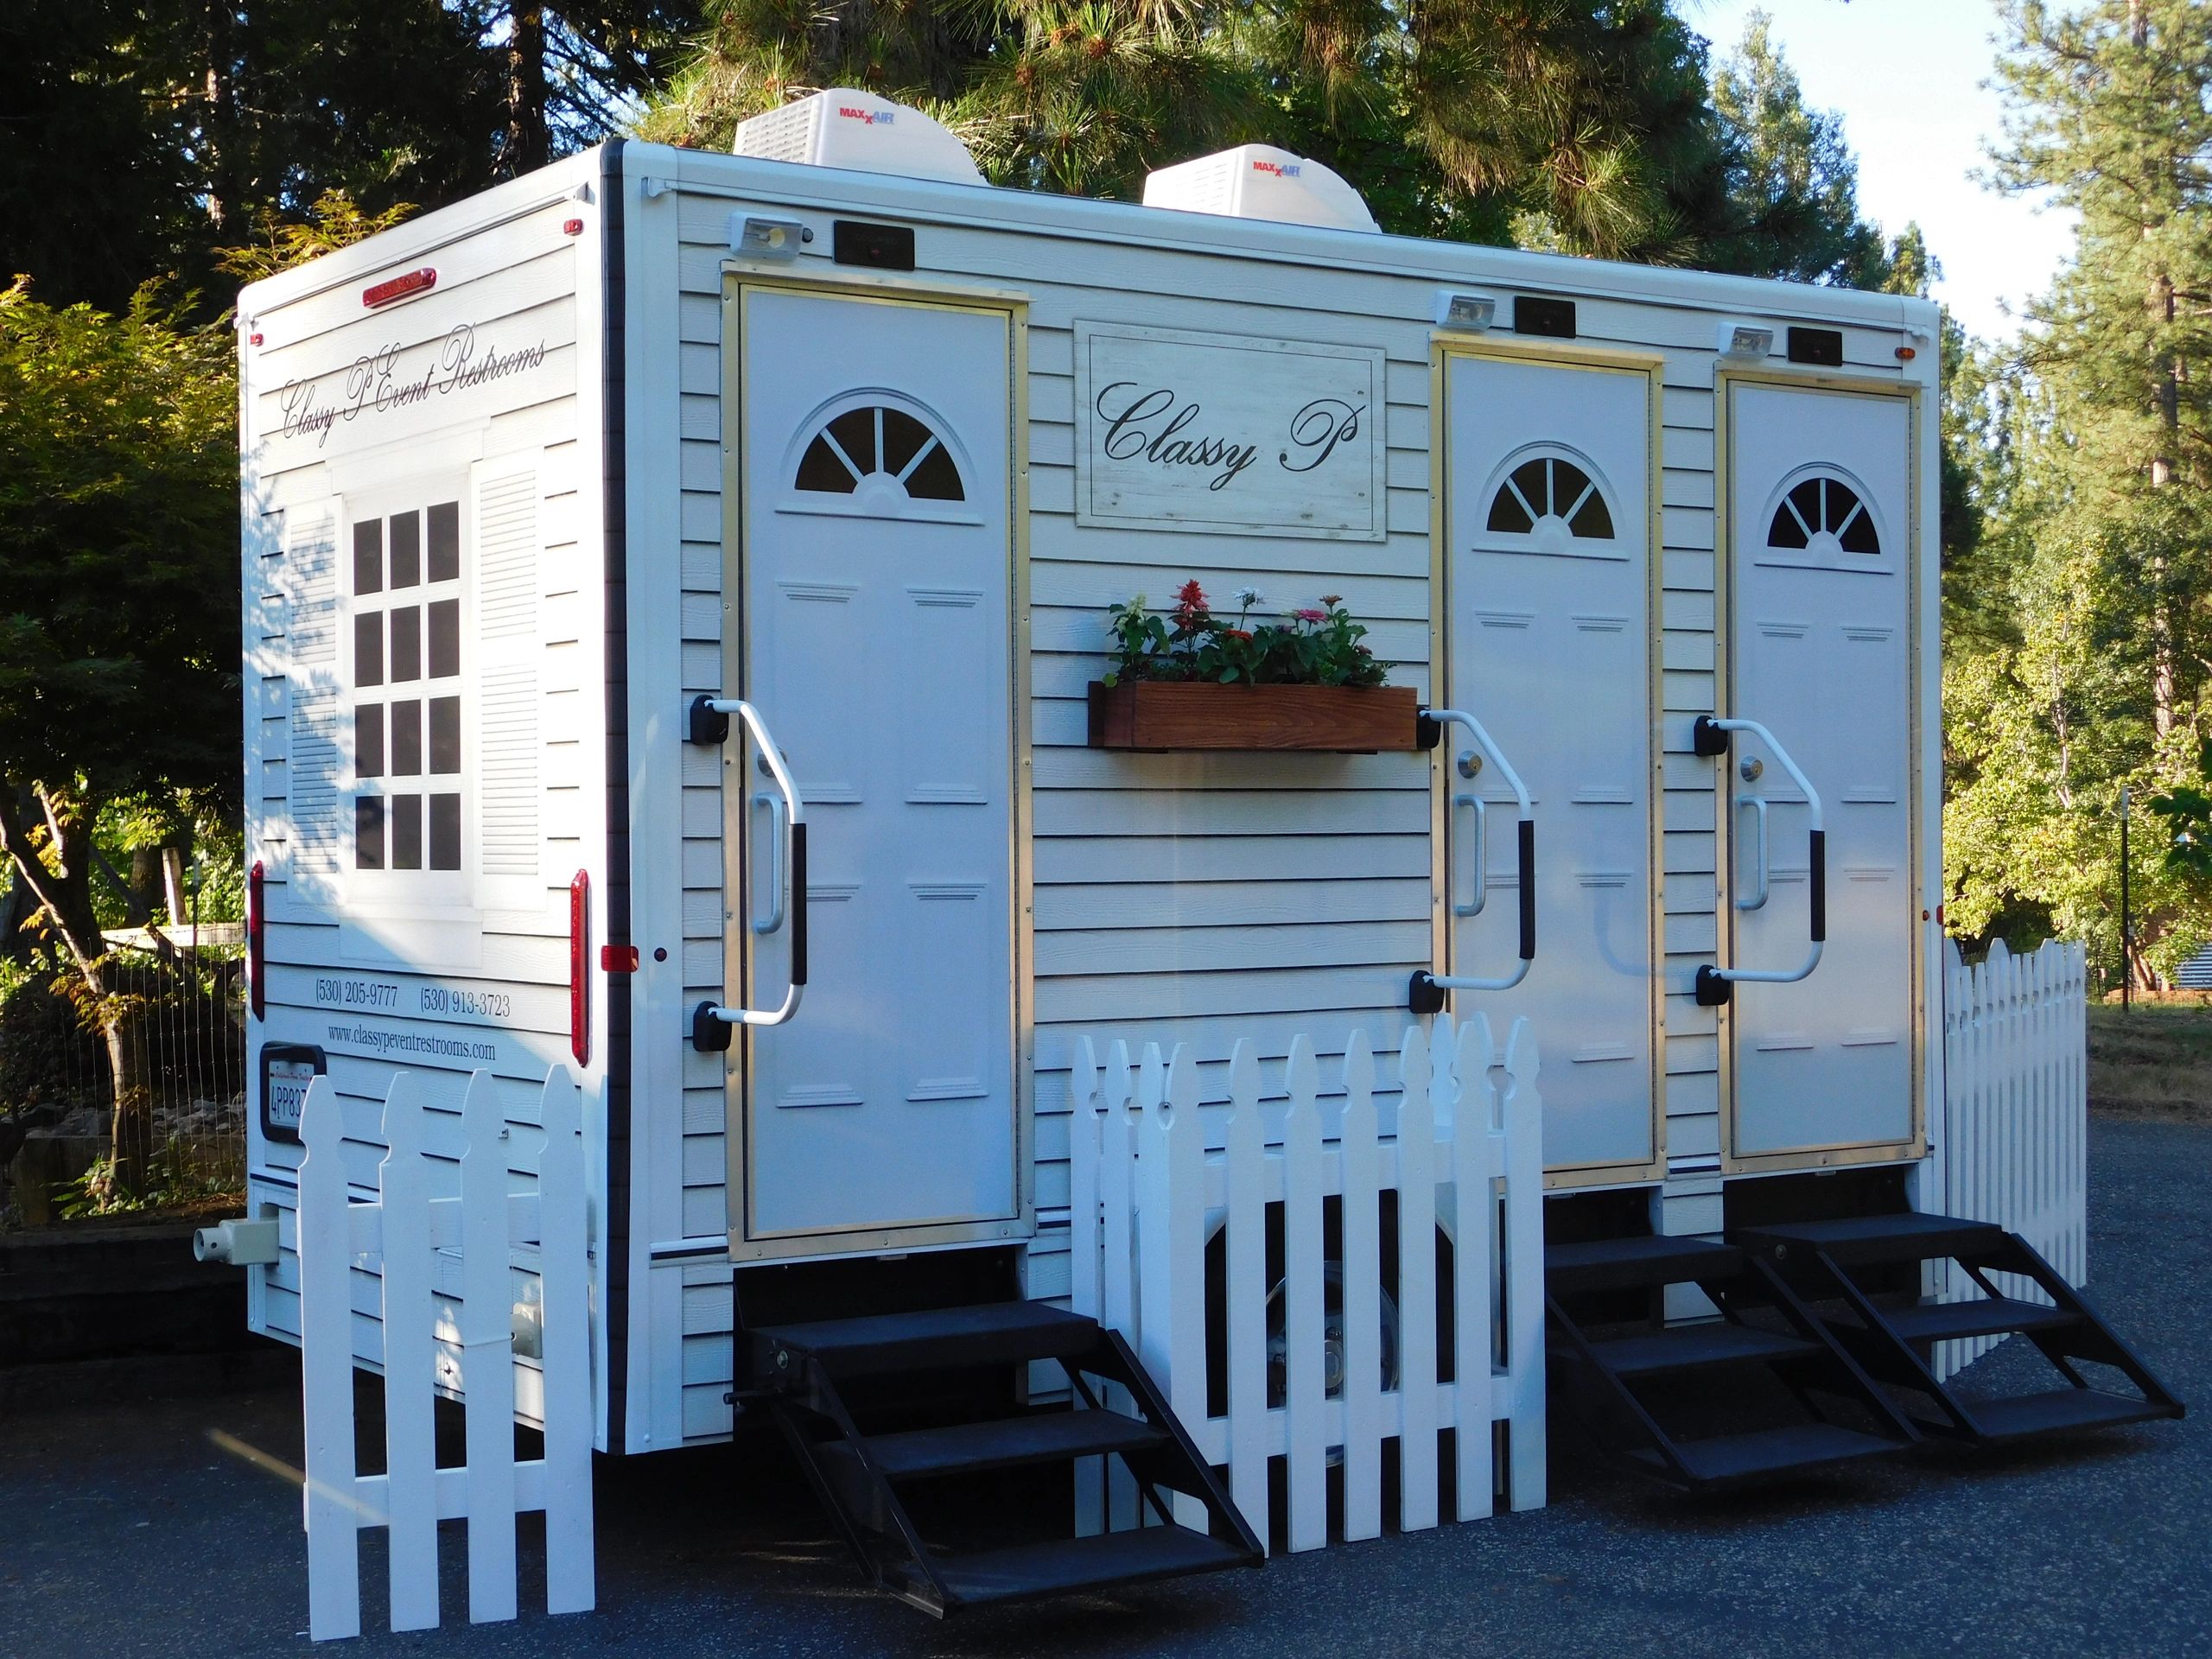 Our cottage theme luxury restrooms will be a hit at any venue.